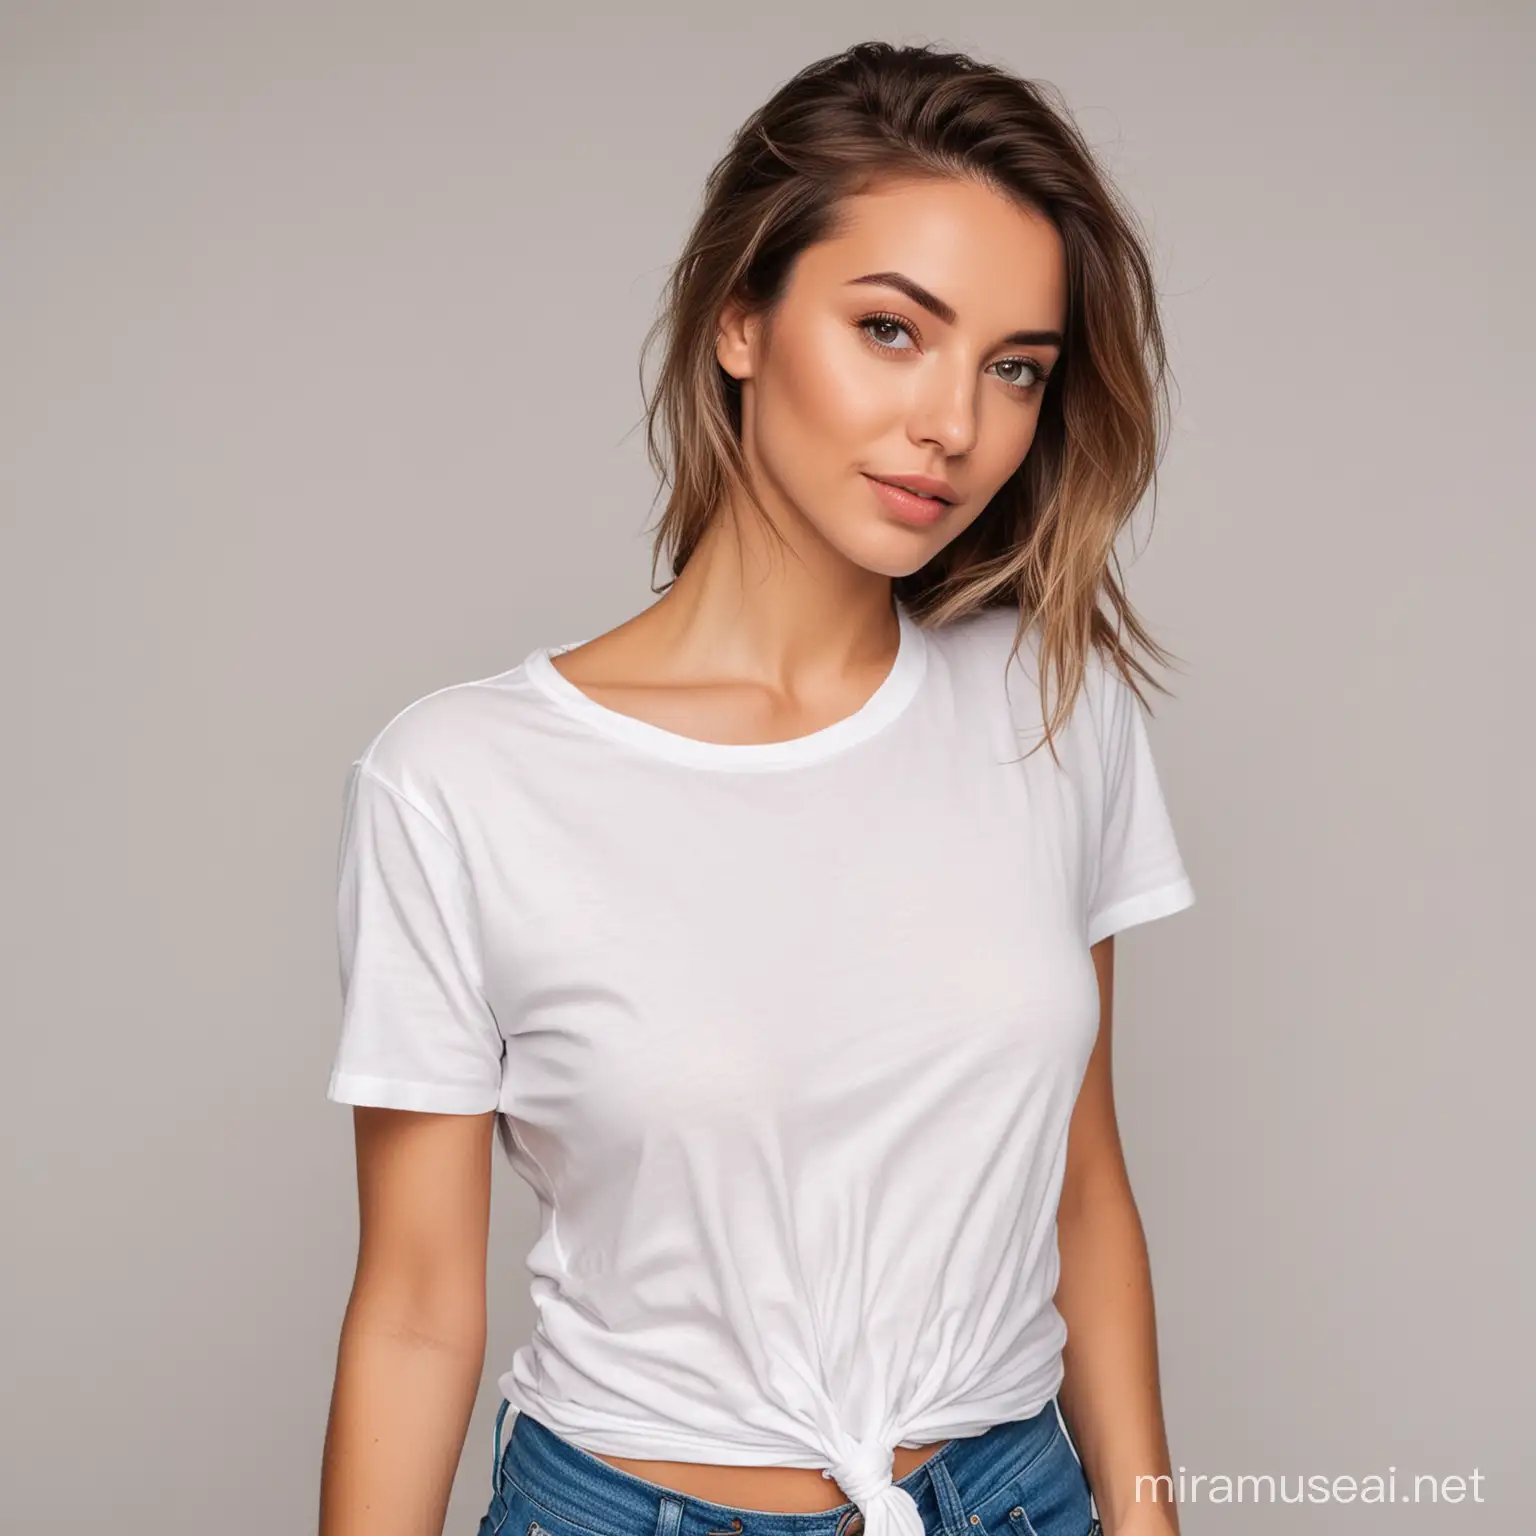 Beautiful woman in white tshirt knotted